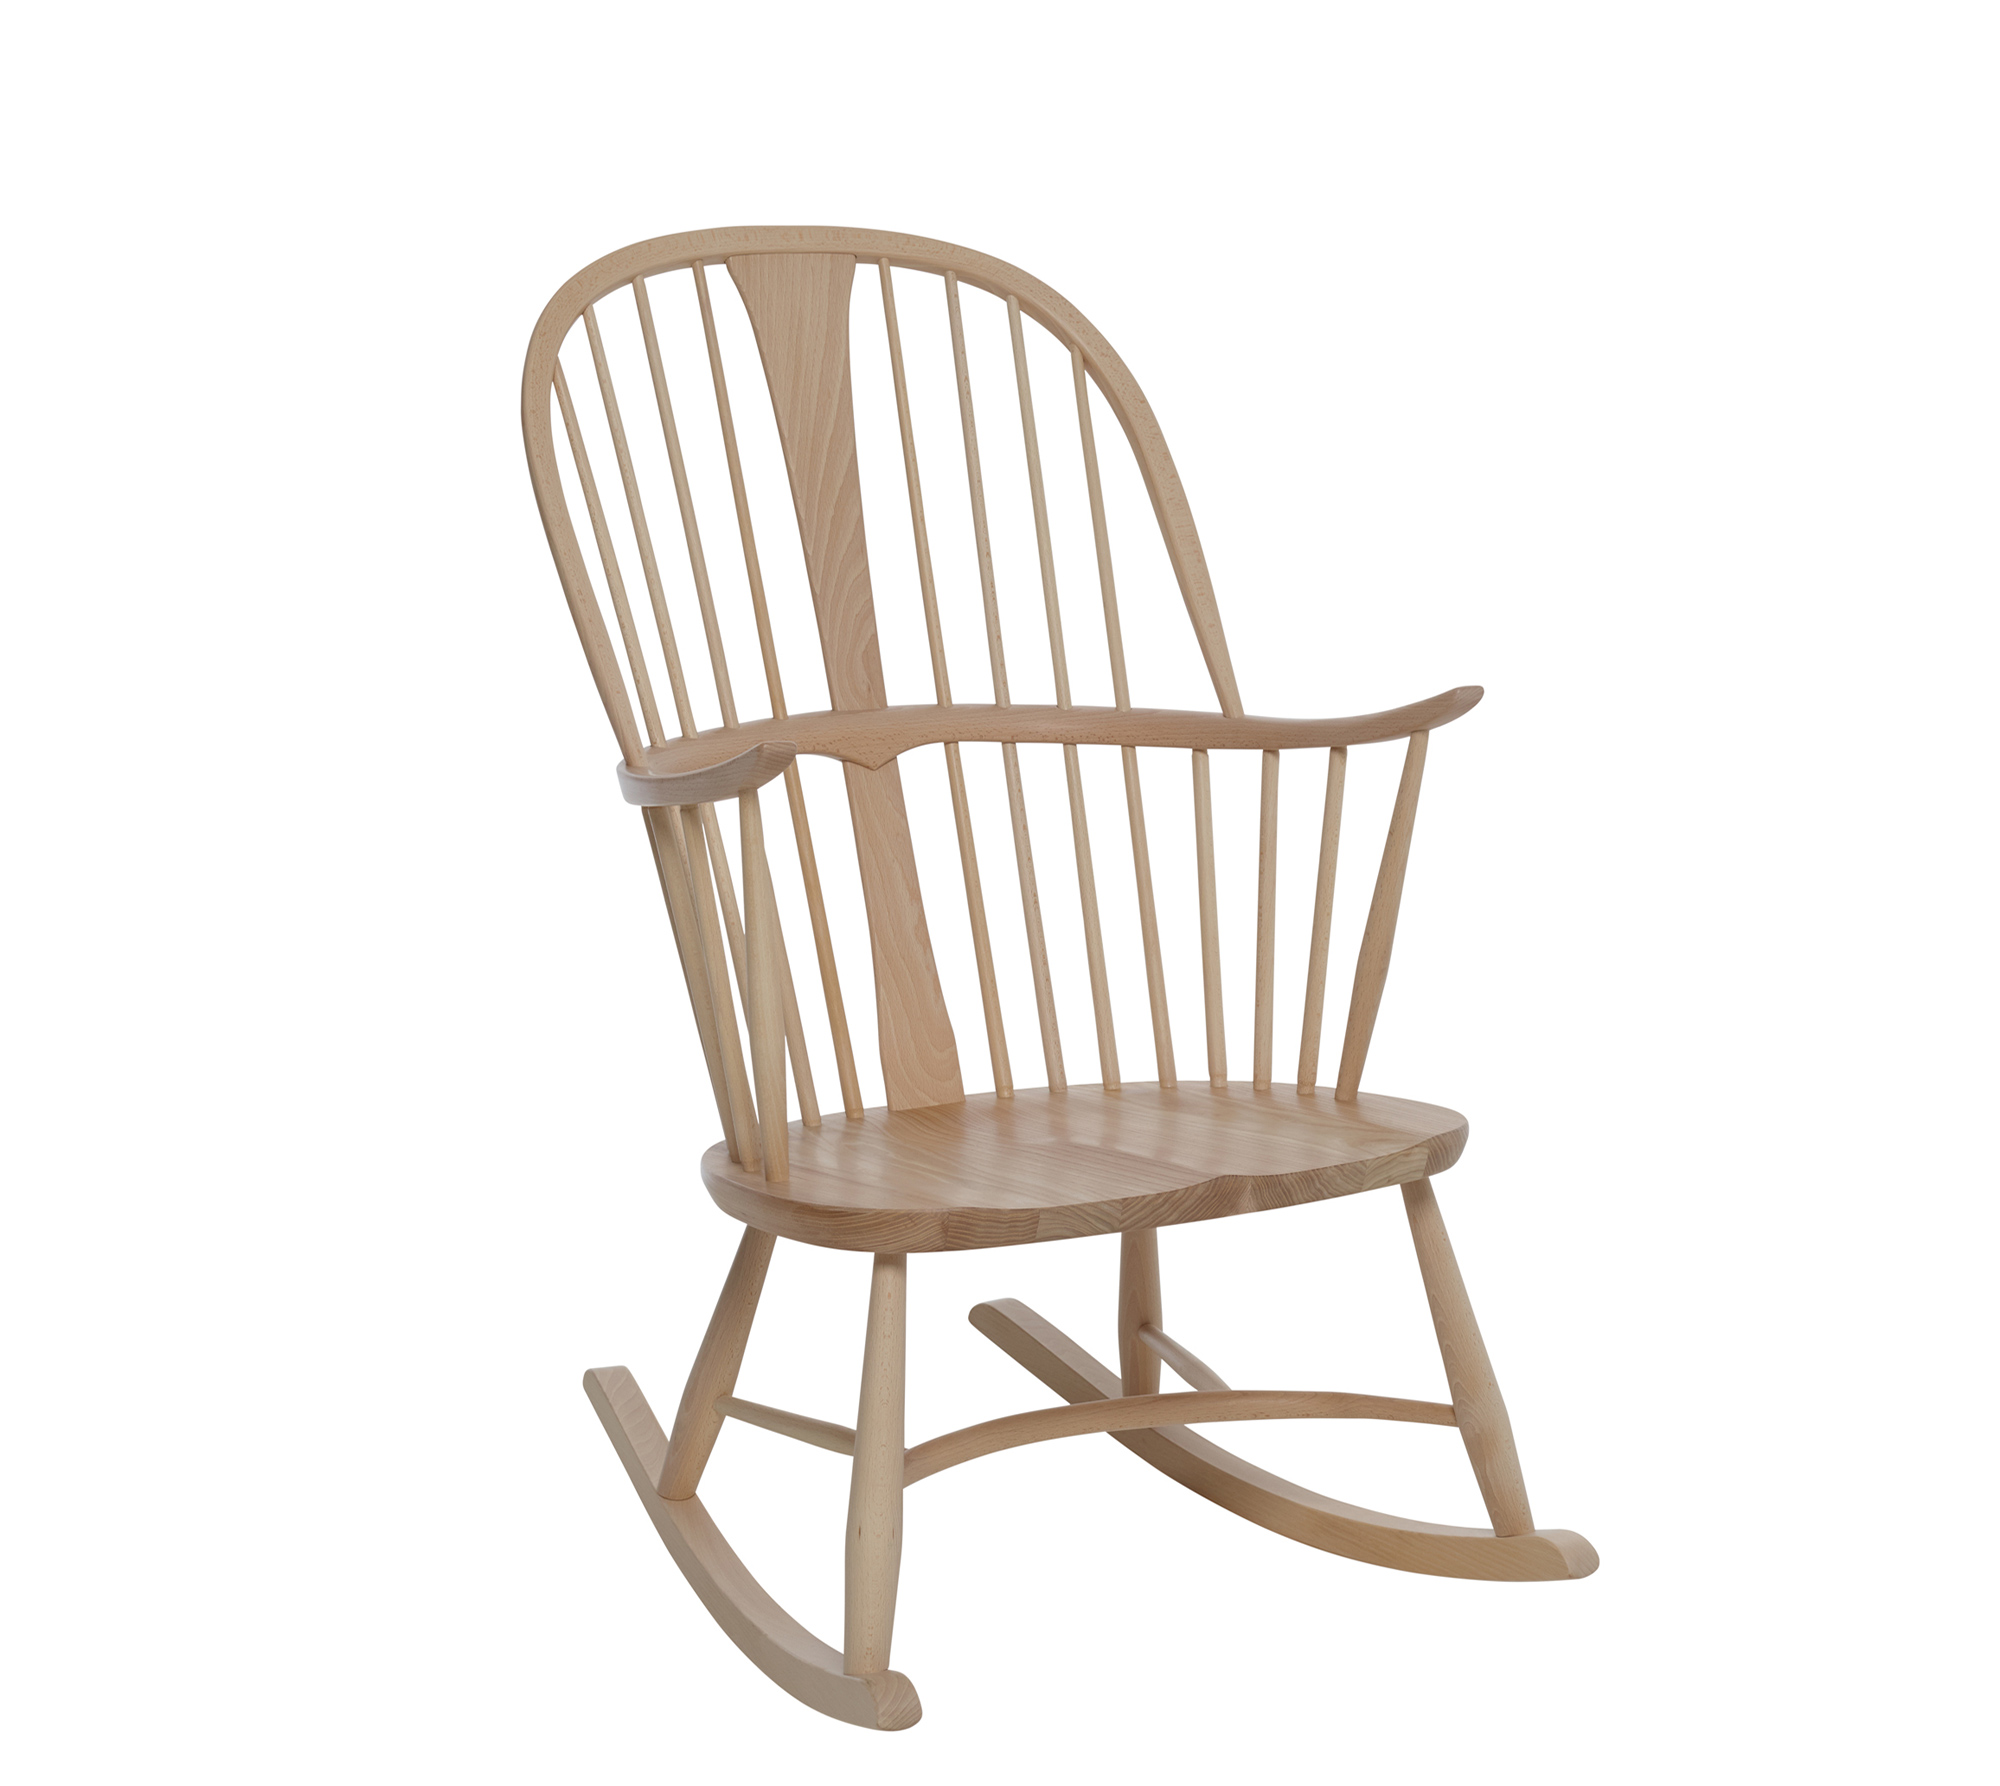 Originals Chairmakers rocking chair 